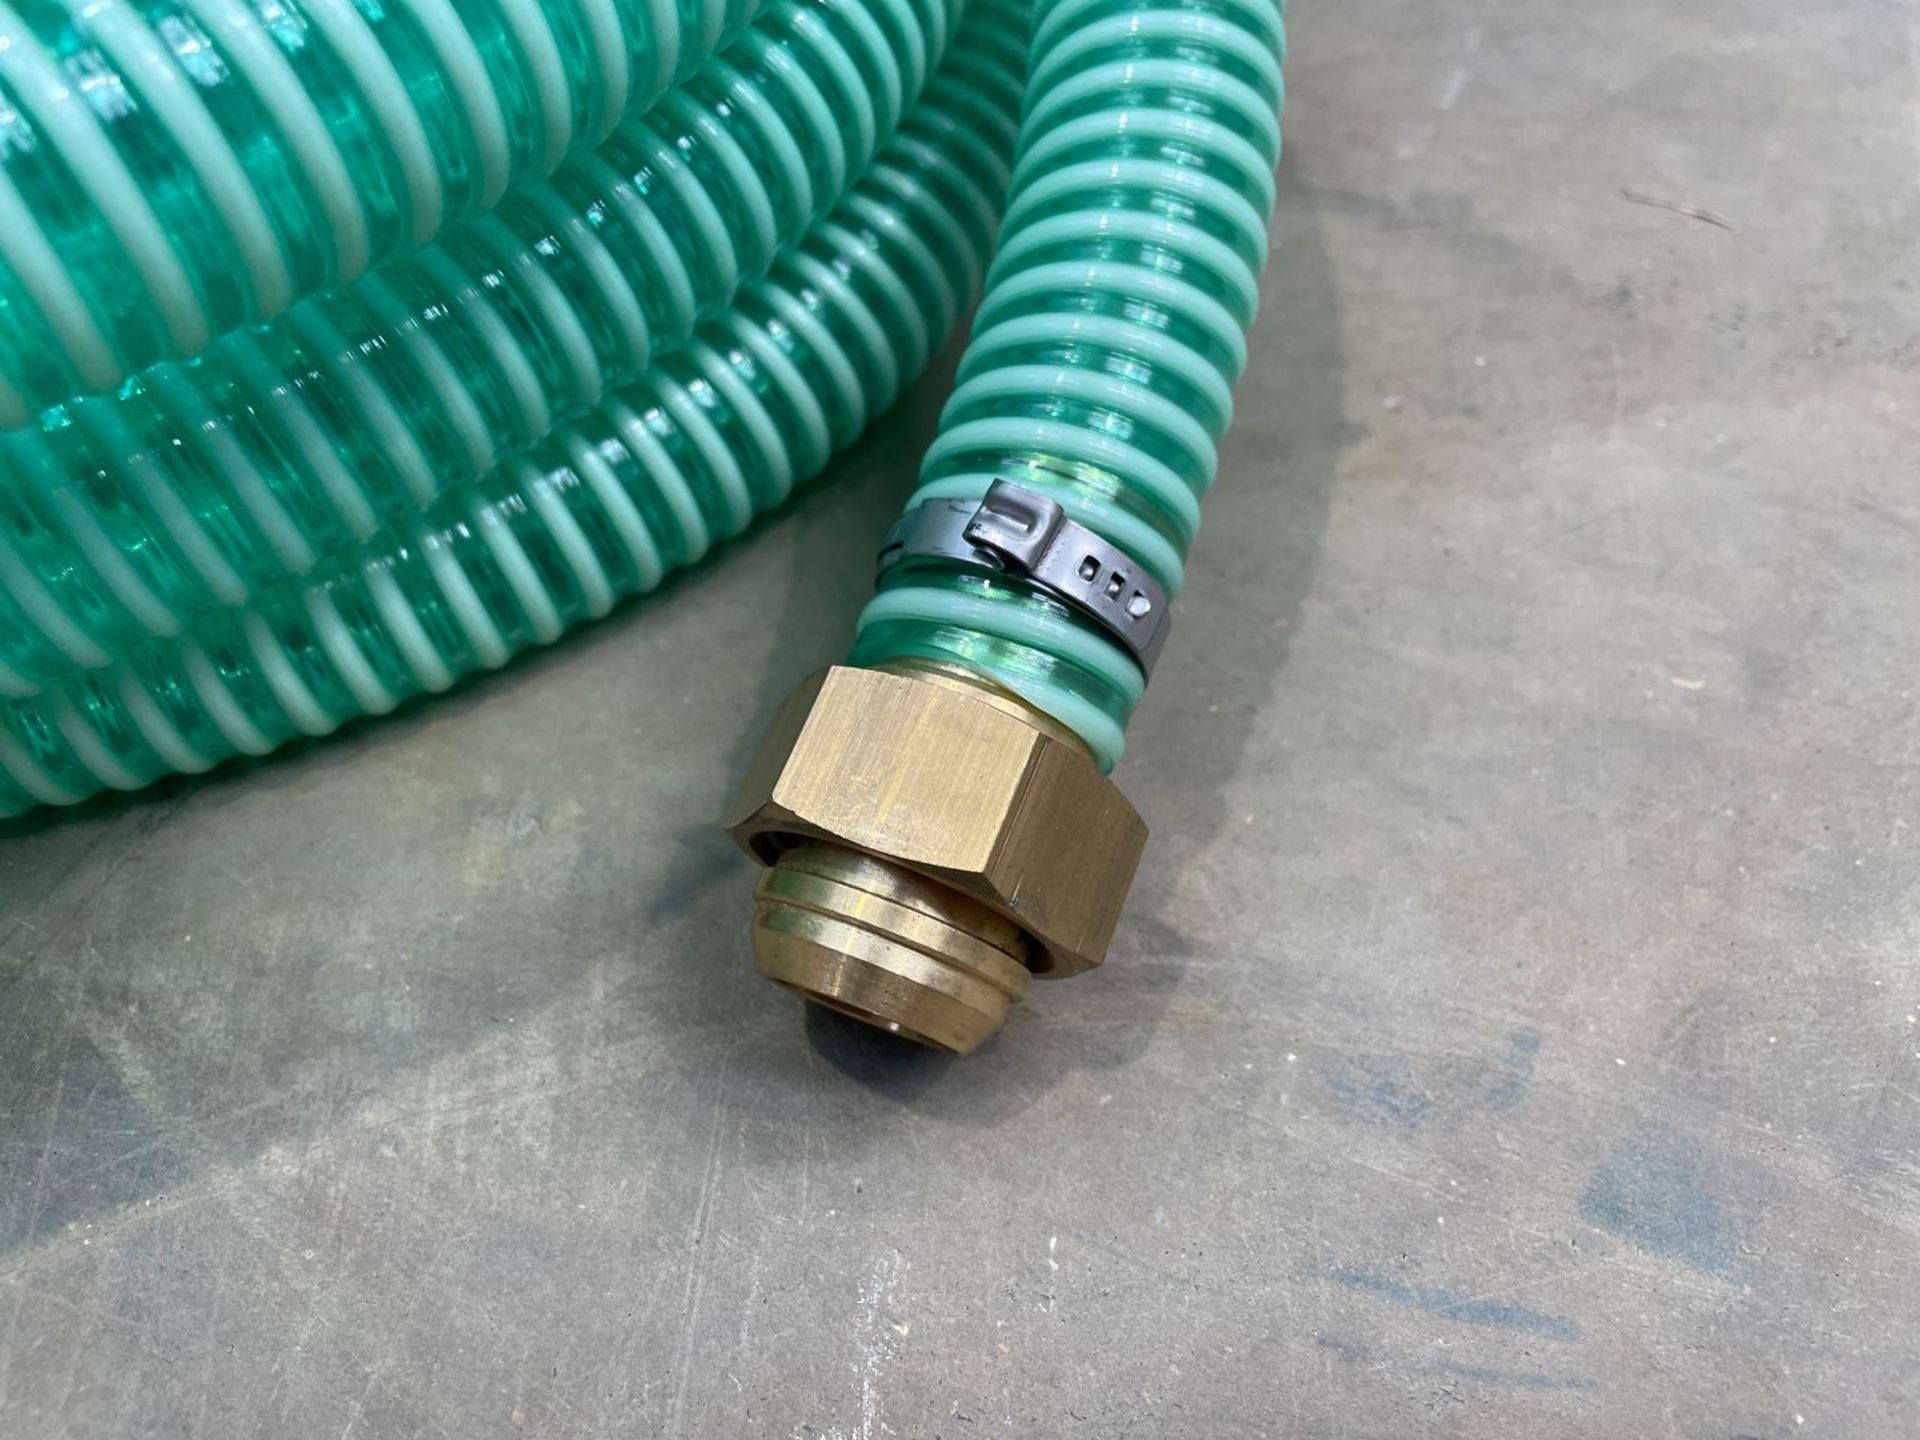 New & Unused - MSA Compatible Aftermarket New Turbo Flow 9 Metre Green Hose & Couplings - Image 2 of 3